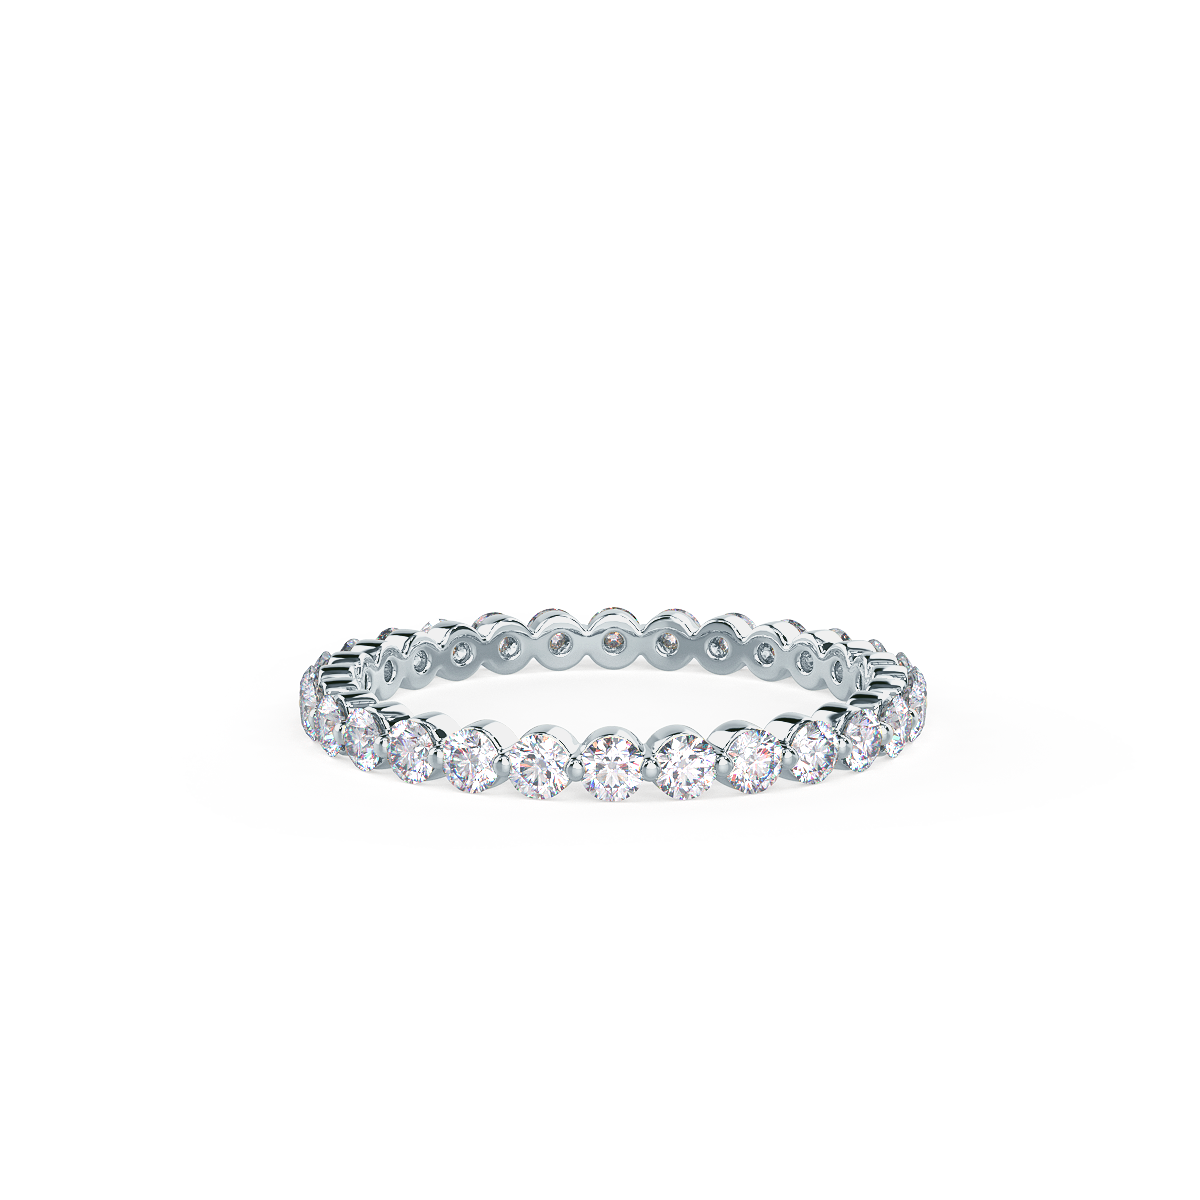 SHARED PRONG ETERNITY BAND